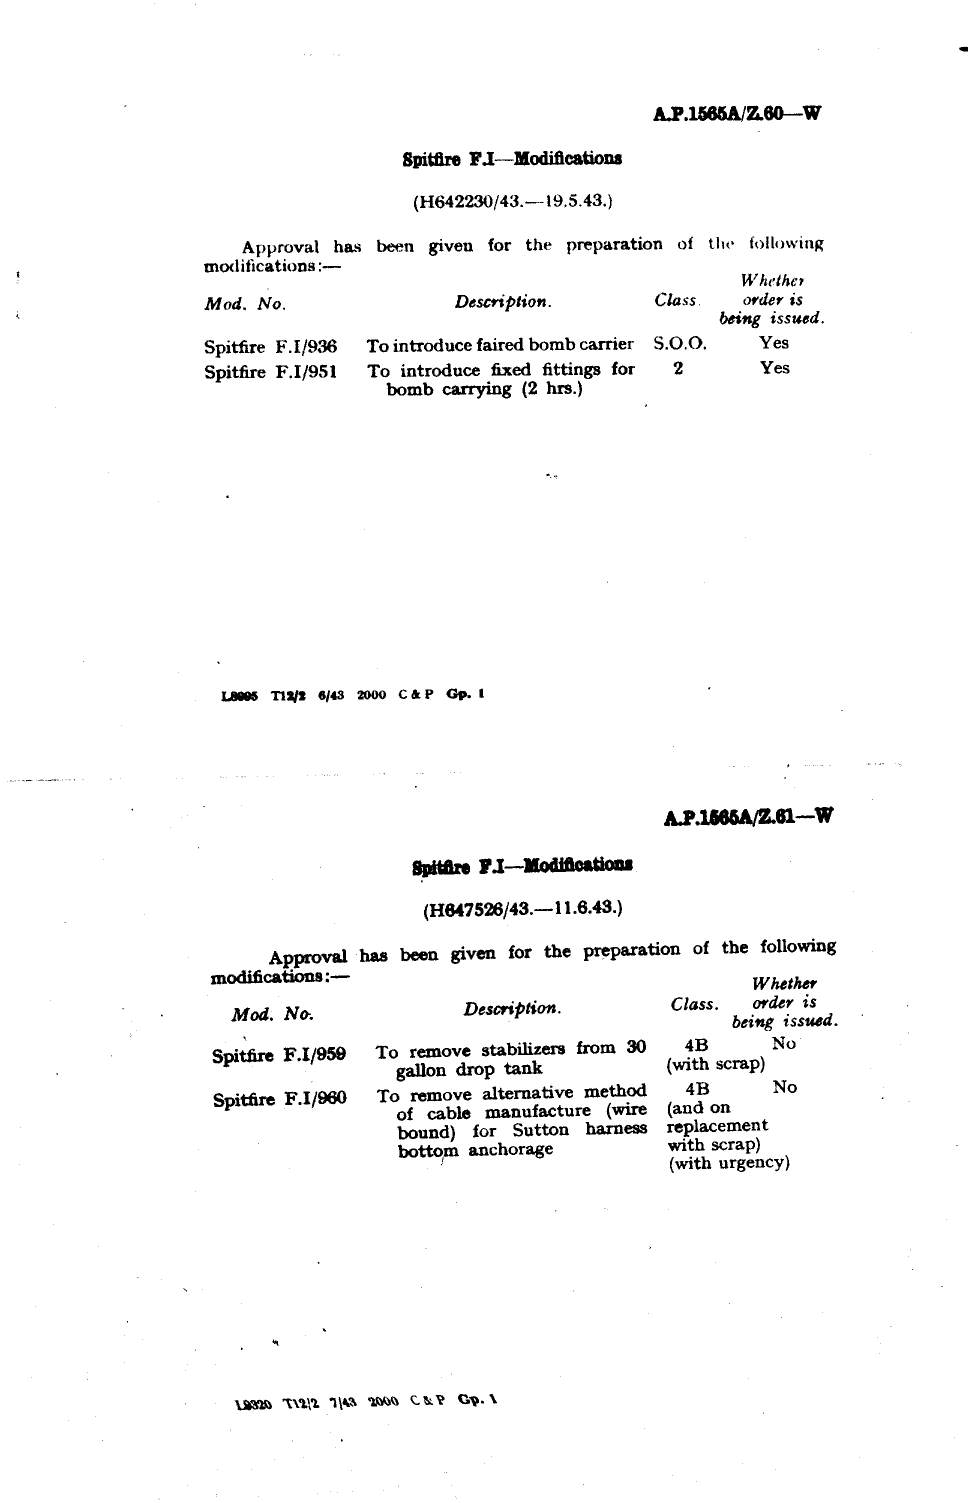 Sample page 1 from AirCorps Library document: Spitfire F.I Modifications 936 and 951